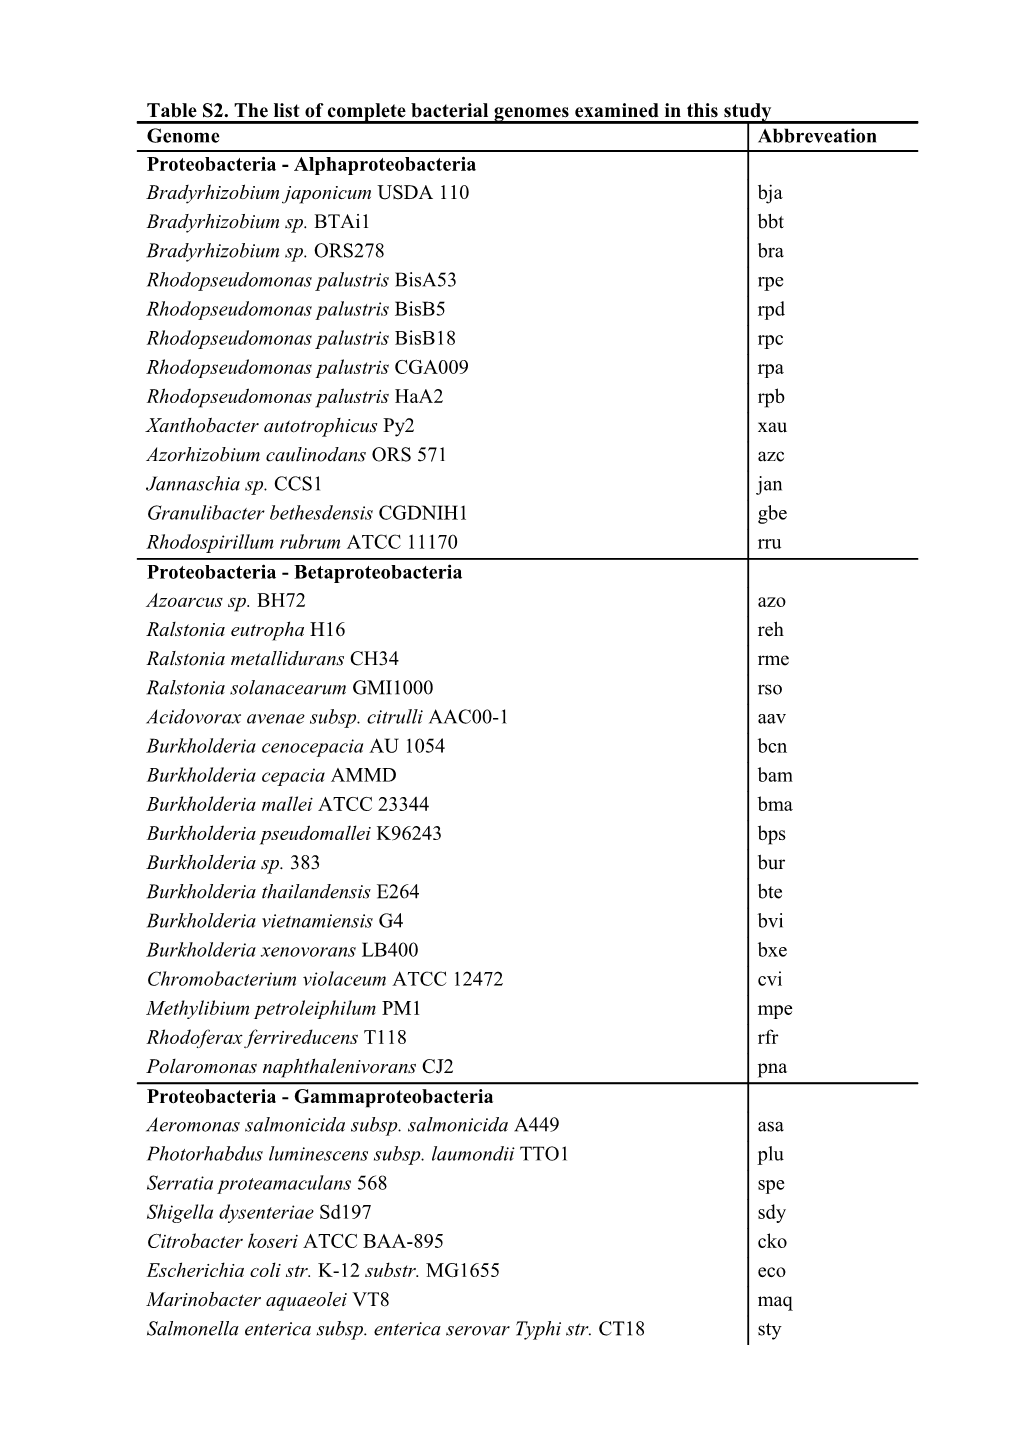 Table S2. the List of Complete Bacterial Genomes Examined in This Study